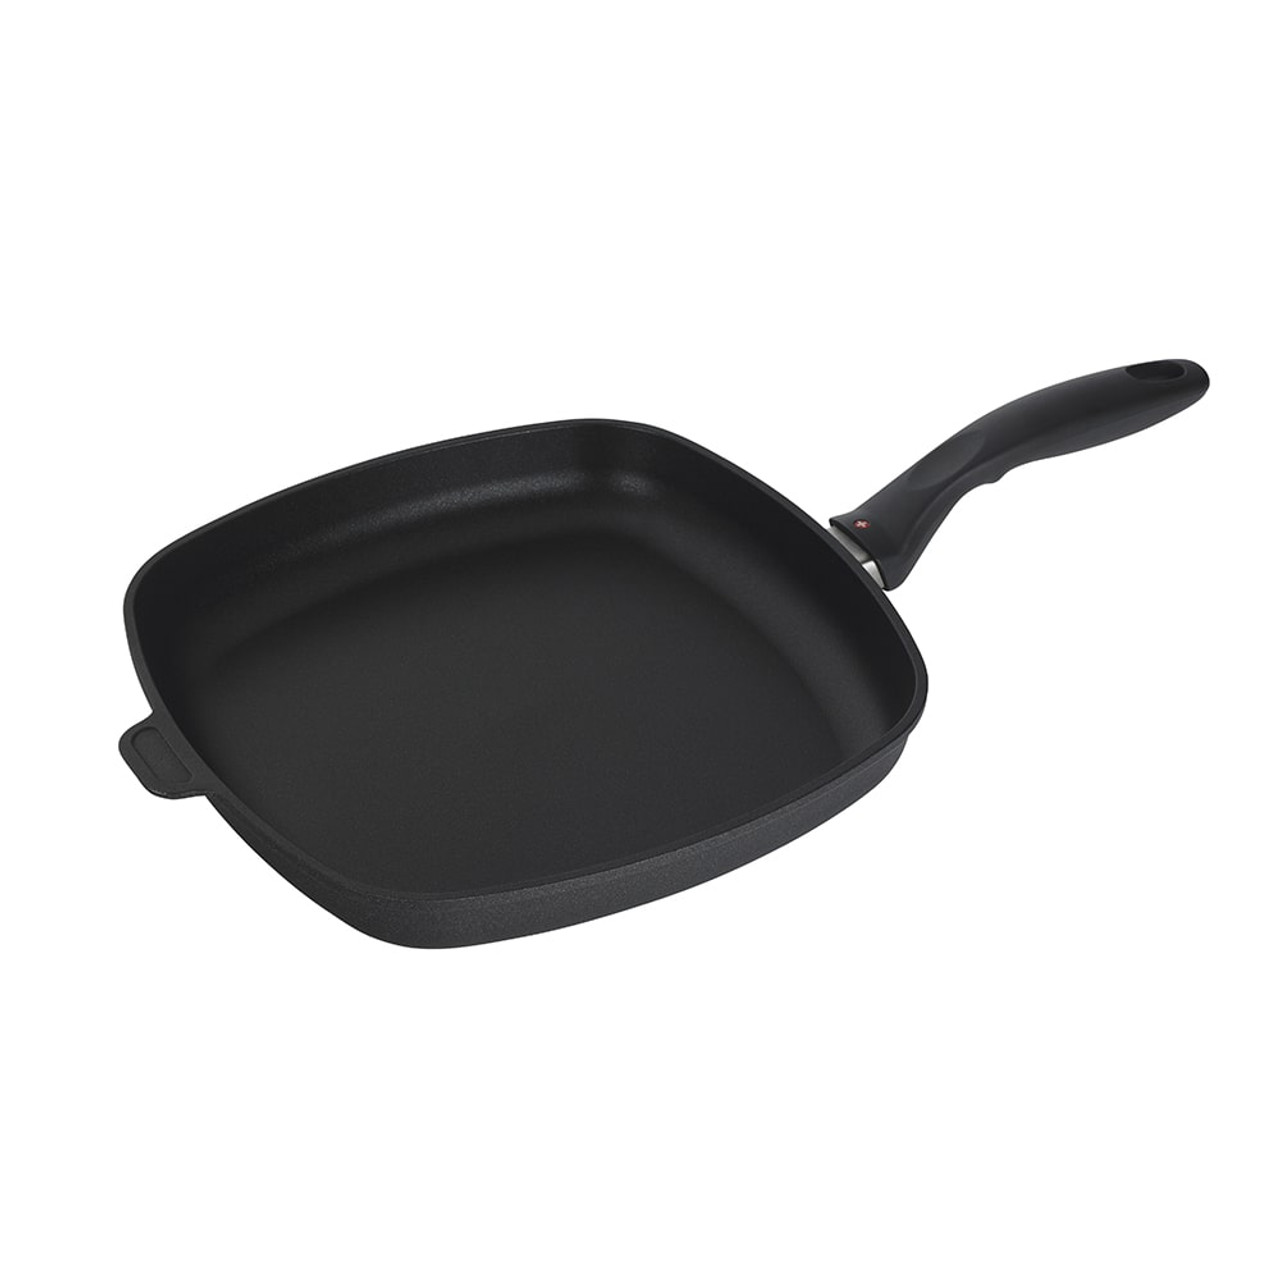 https://cdn11.bigcommerce.com/s-hccytny0od/images/stencil/1280x1280/products/3602/12856/swiss-diamond-xd-nonstick-square-fry-pan__99180.1601475298.jpg?c=2?imbypass=on